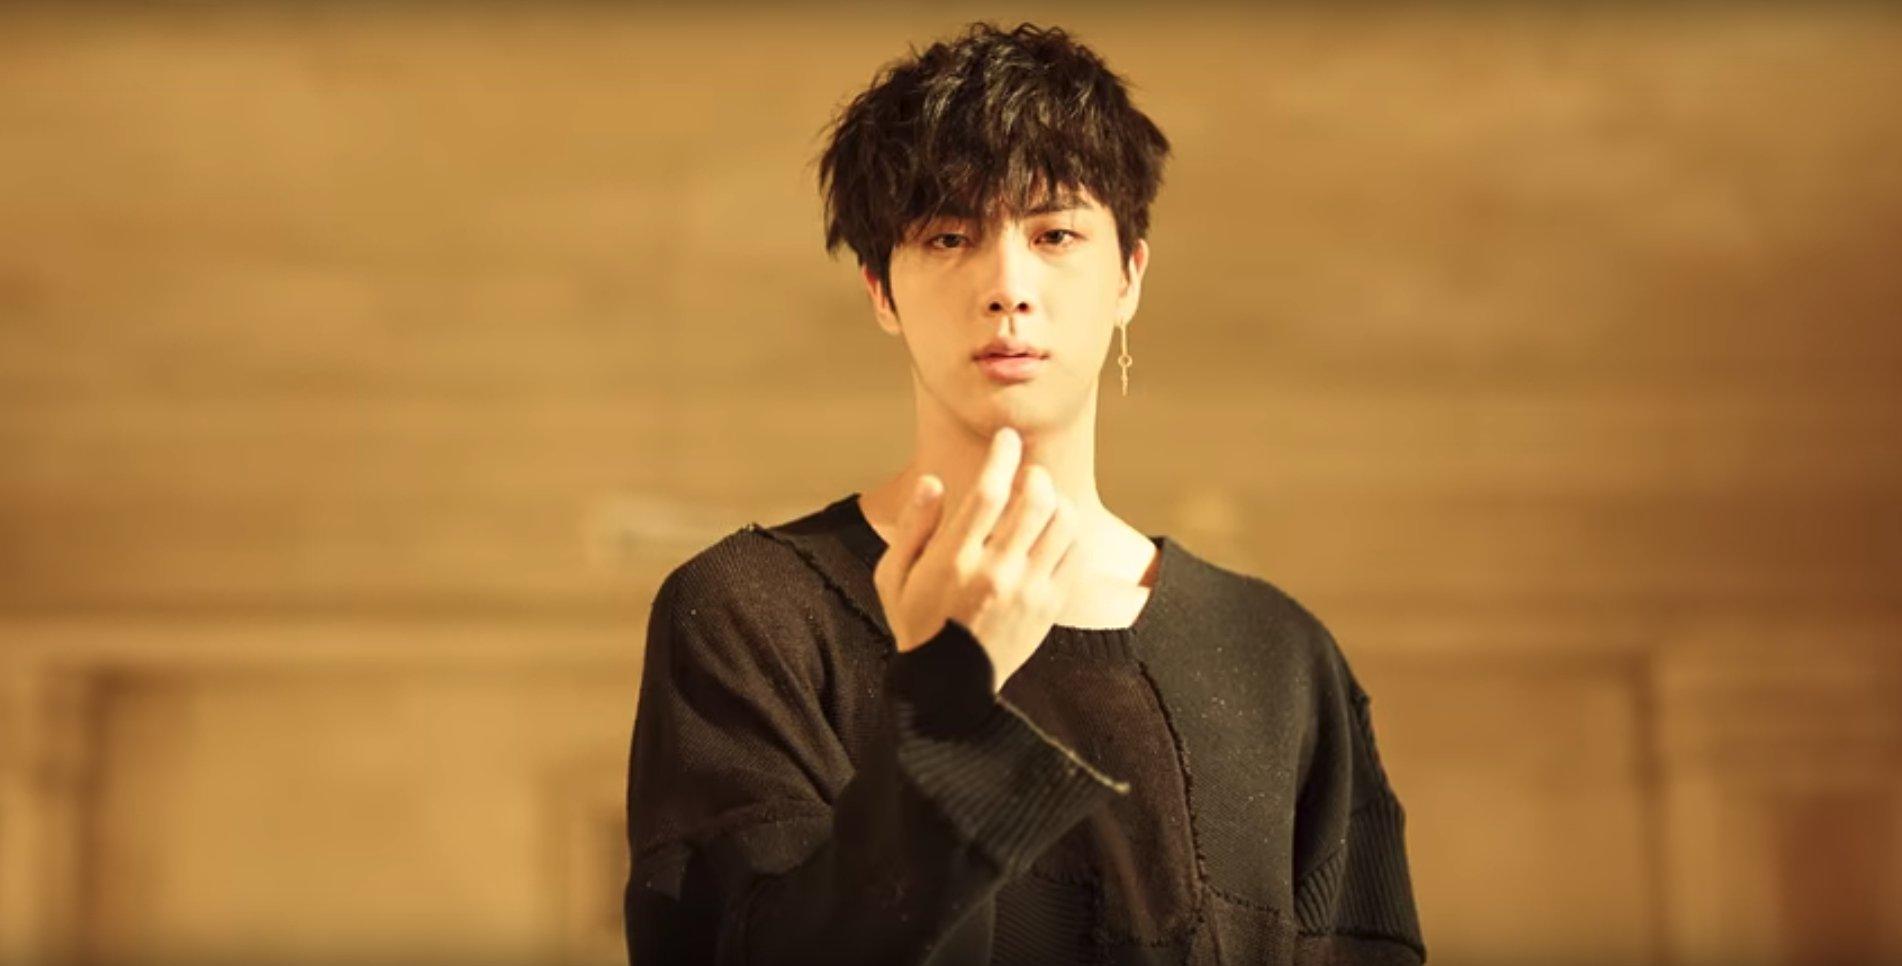 BTS' Jin from "Fake Love" music video